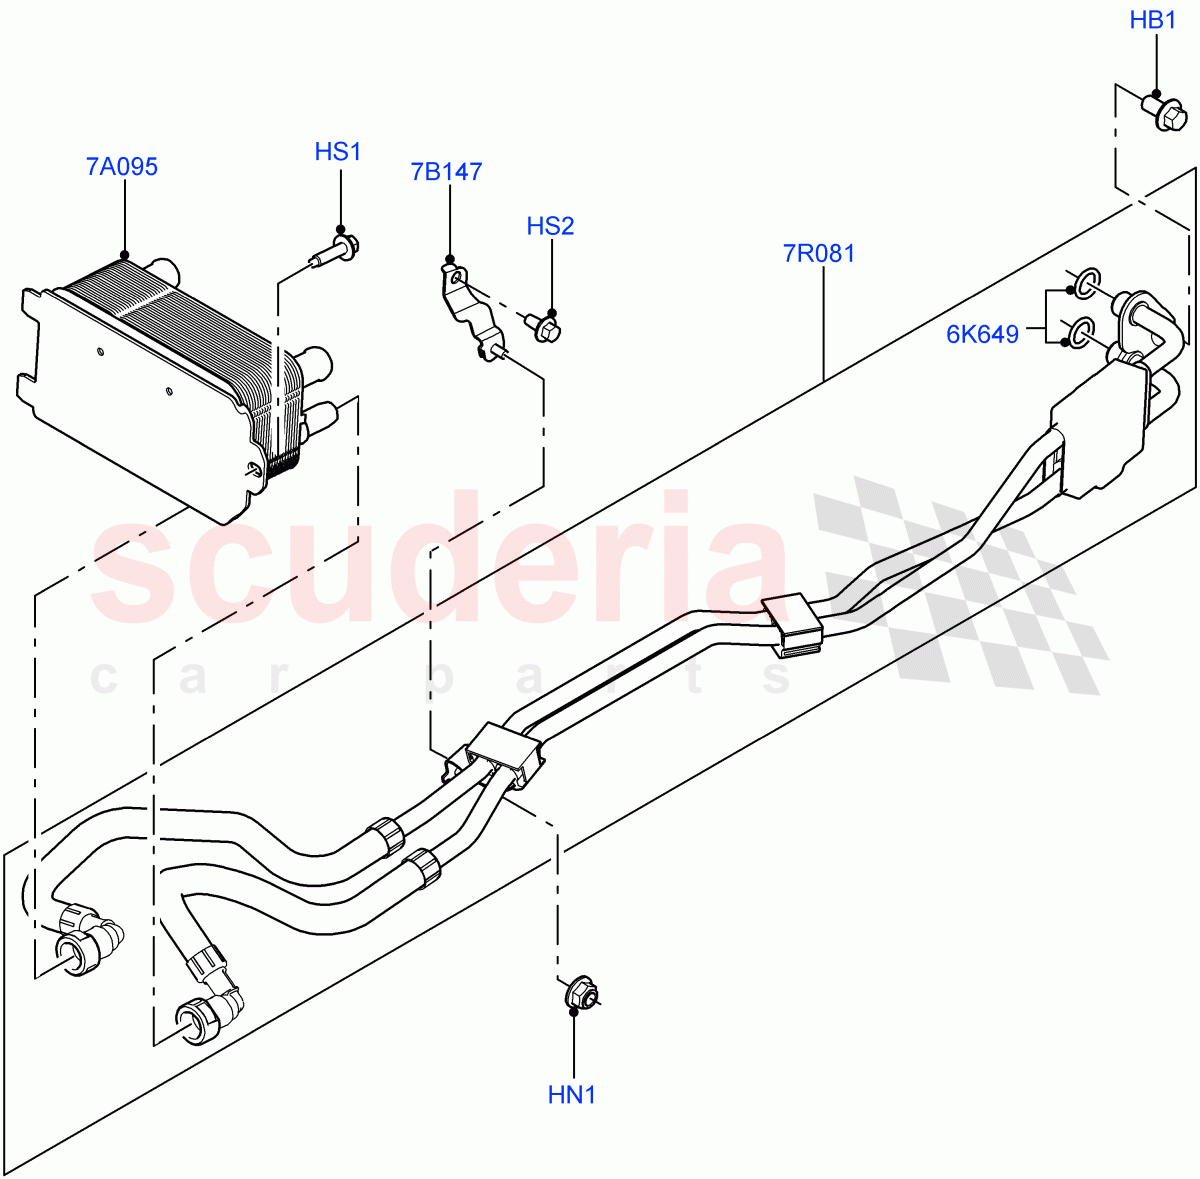 Transmission Cooling Systems(4.4L DOHC DITC V8 Diesel,8 Speed Auto Trans ZF 8HP70 4WD) of Land Rover Land Rover Range Rover (2012-2021) [3.0 I6 Turbo Diesel AJ20D6]